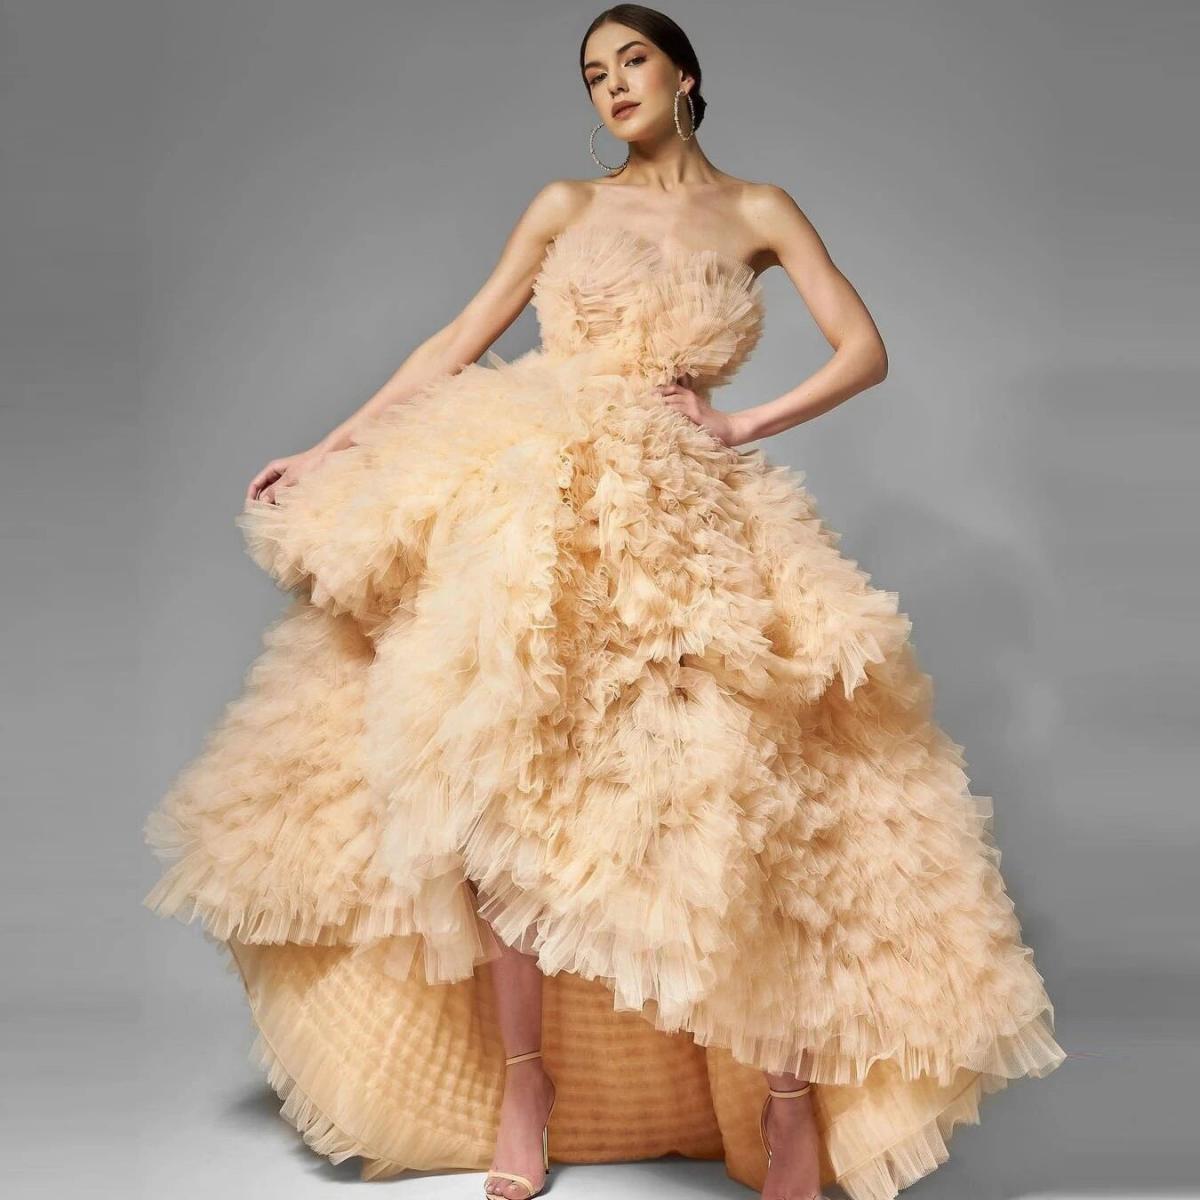 Chic Tiered Tulle Formal Dress Champagne Ruffled Mesh High Low Prom Party Dresses 2023 New Evening Dresses Vestidos De F